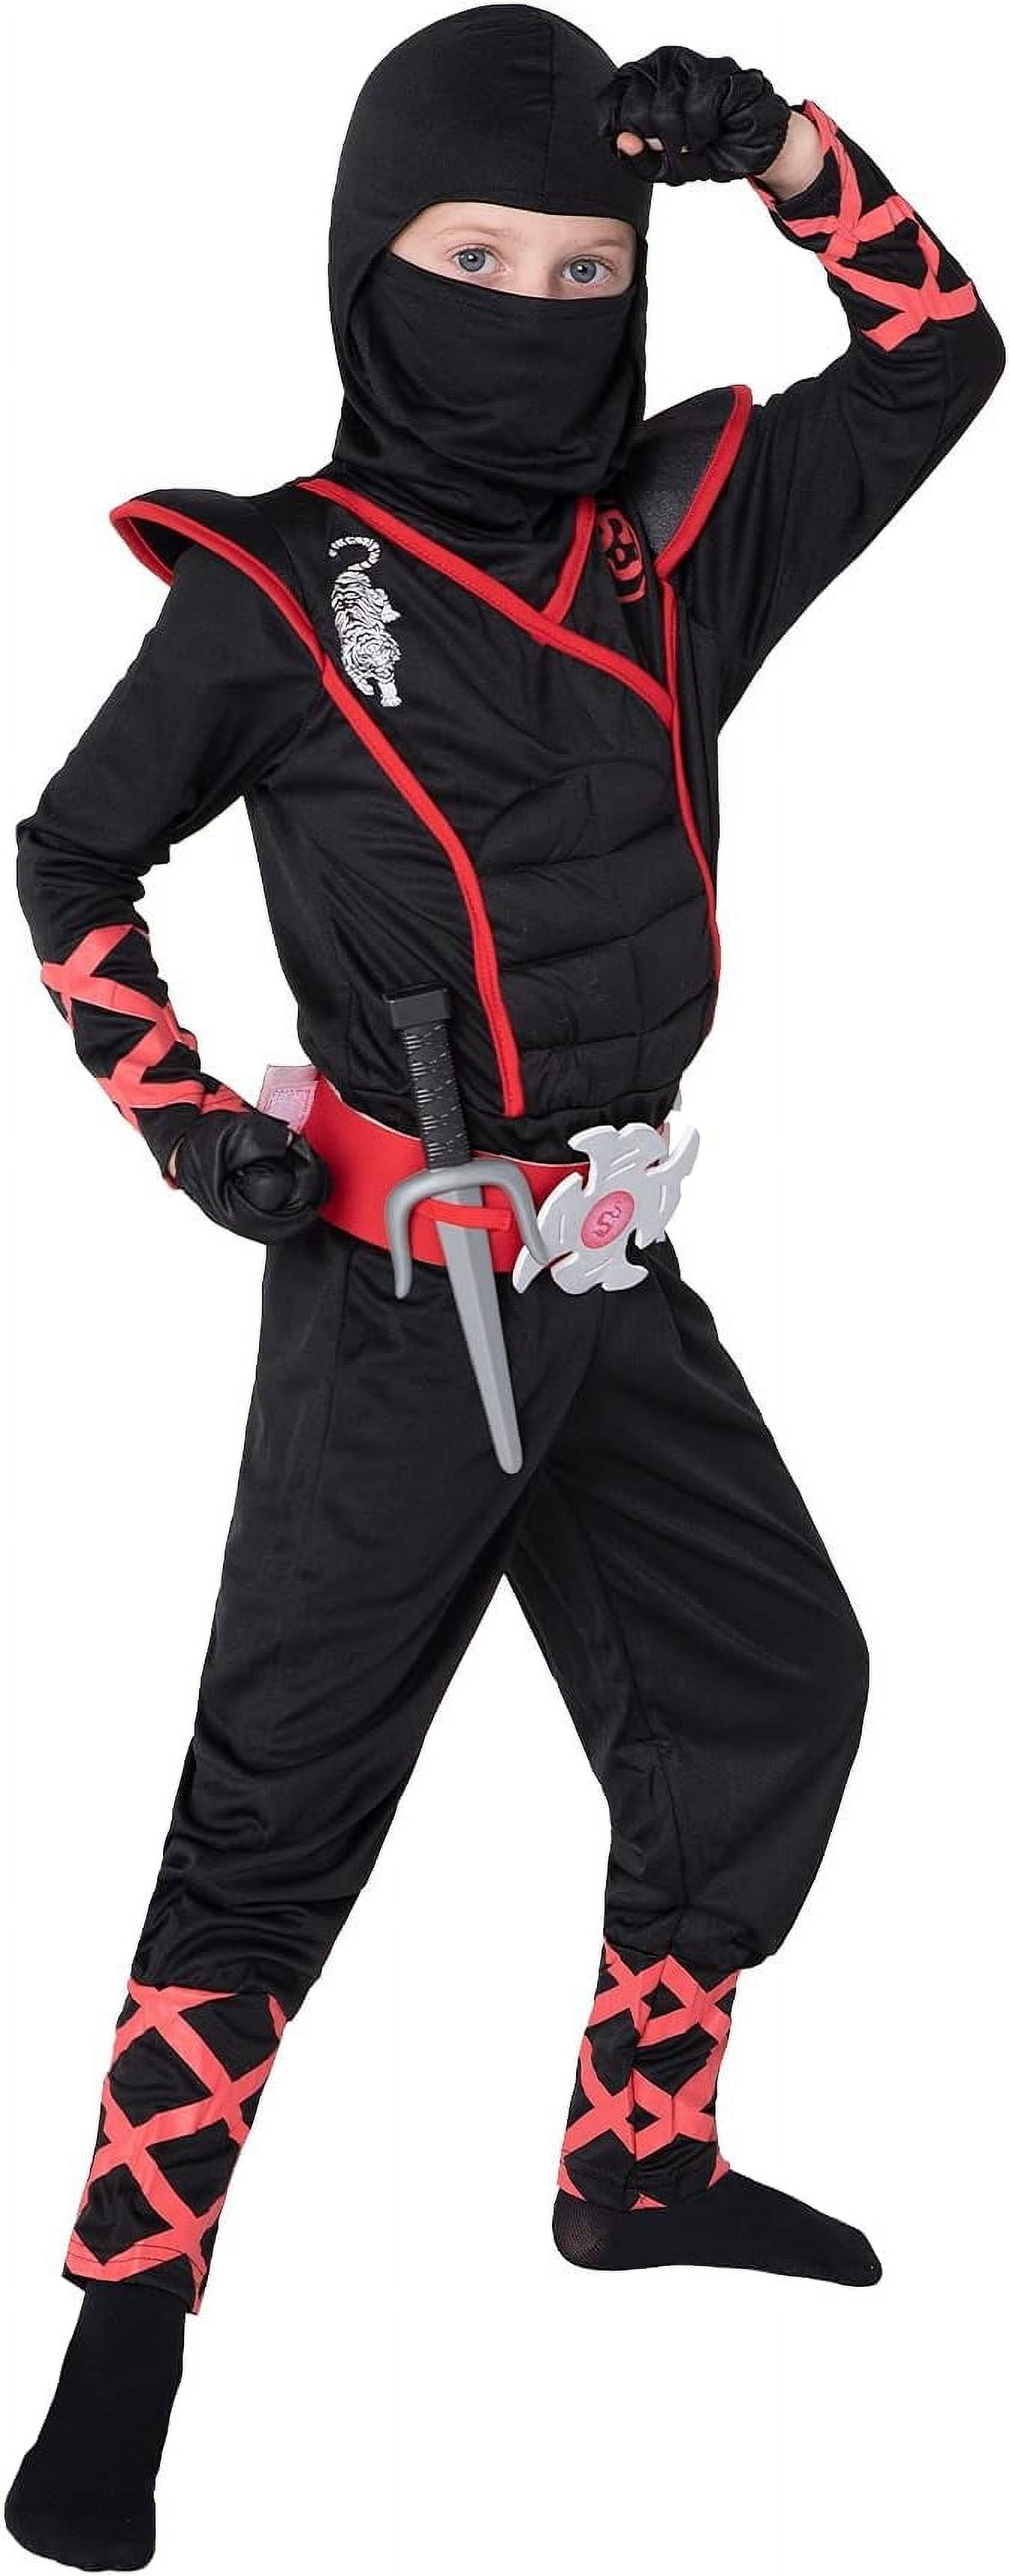 Xplanet Ninja Halloween Costume for Boys with Included Accessories for Child Dress Up Best Gifts